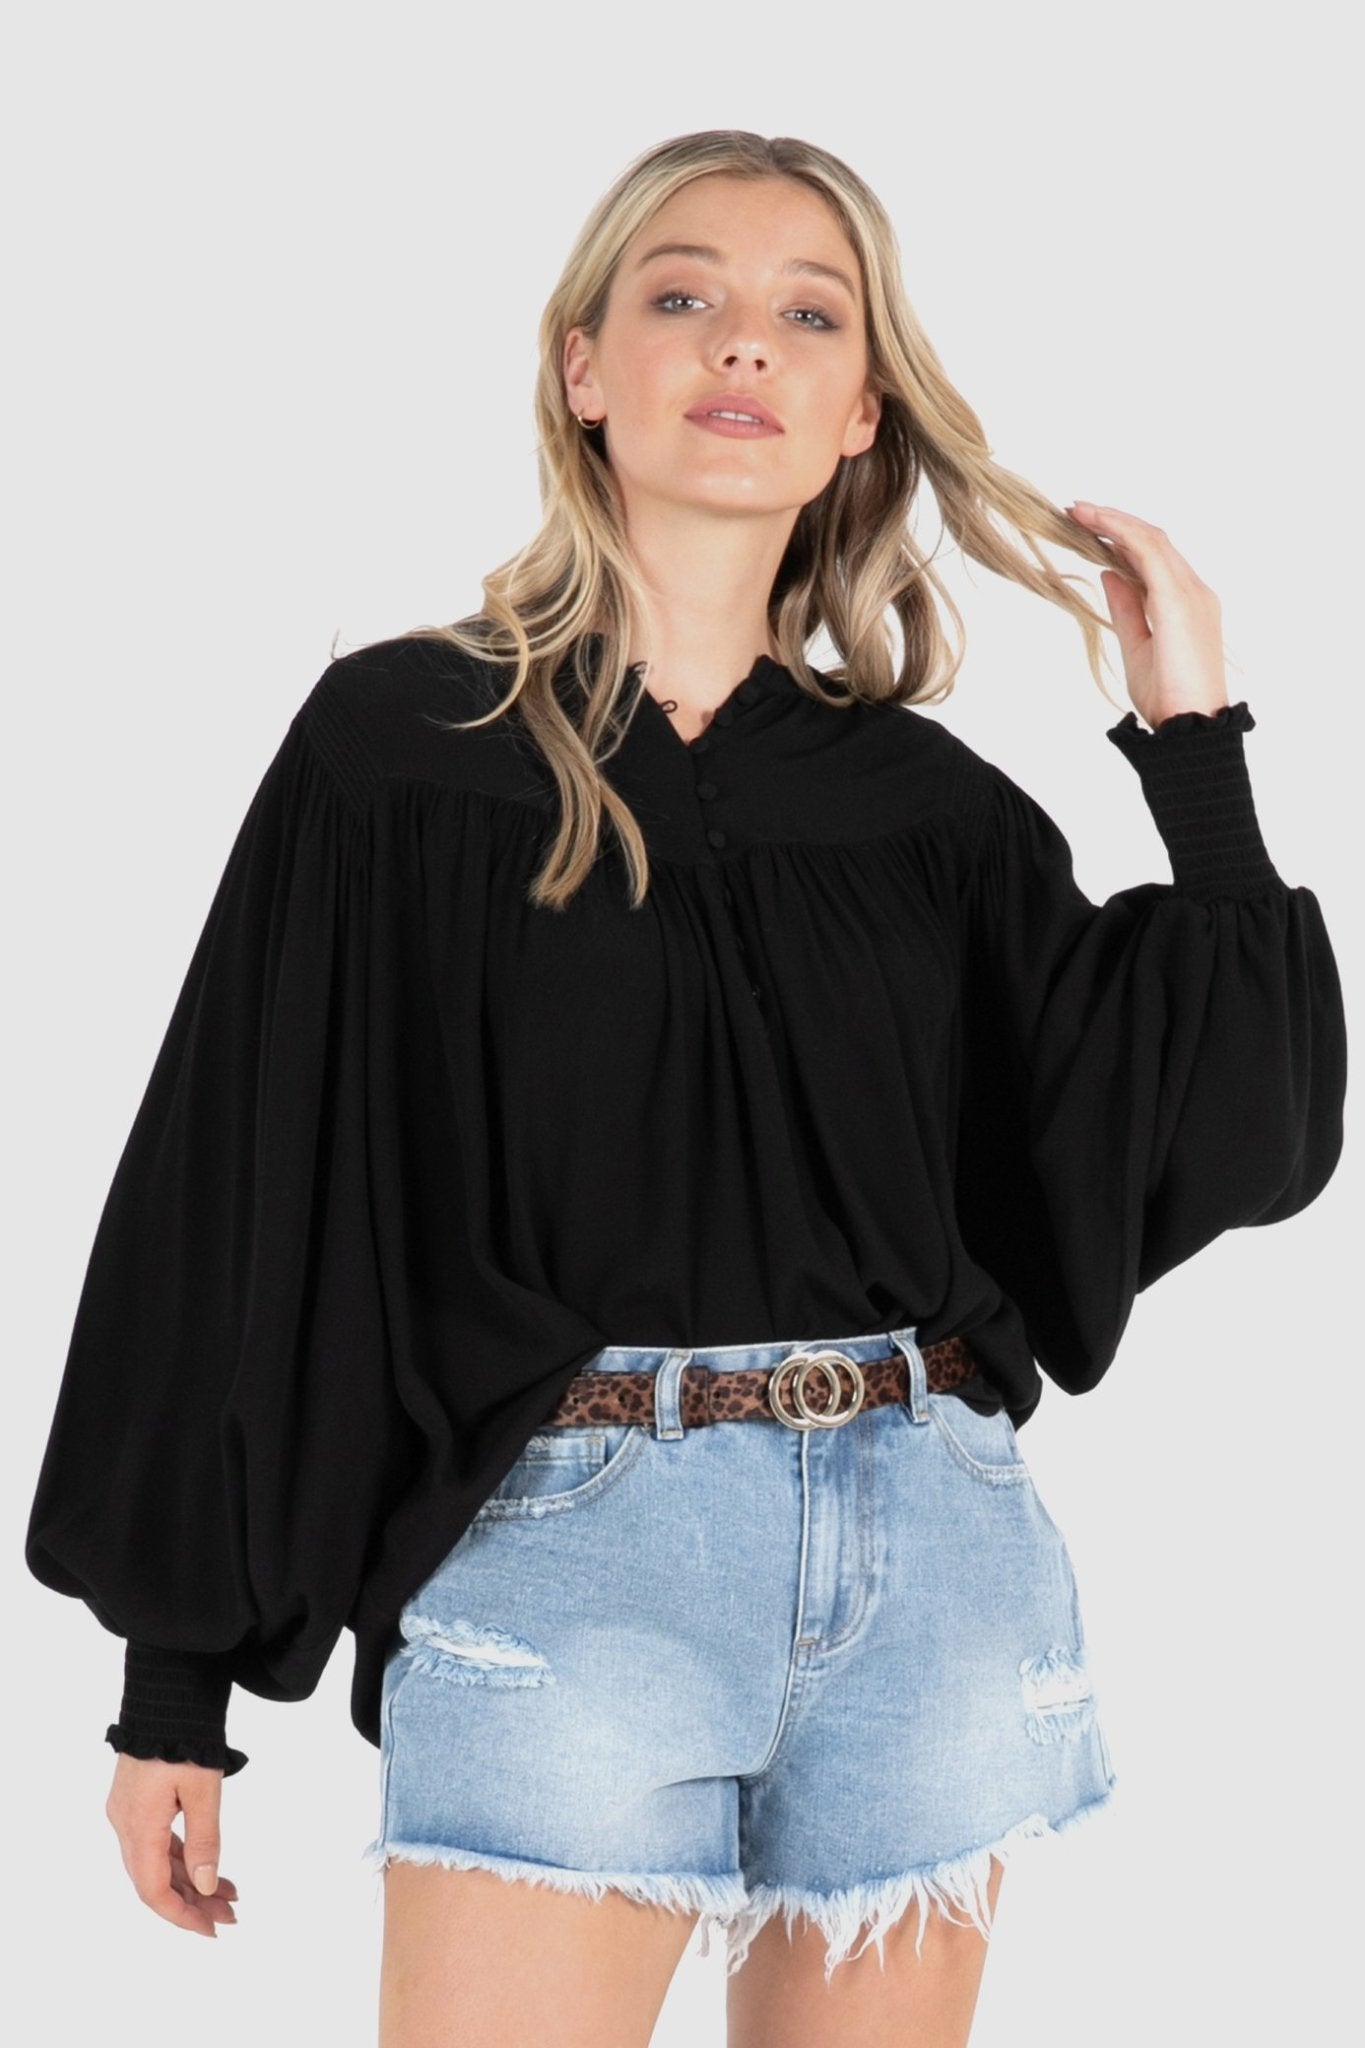 Sass Neeve Blouse in Black Size 10 or 14 - Hey Sara